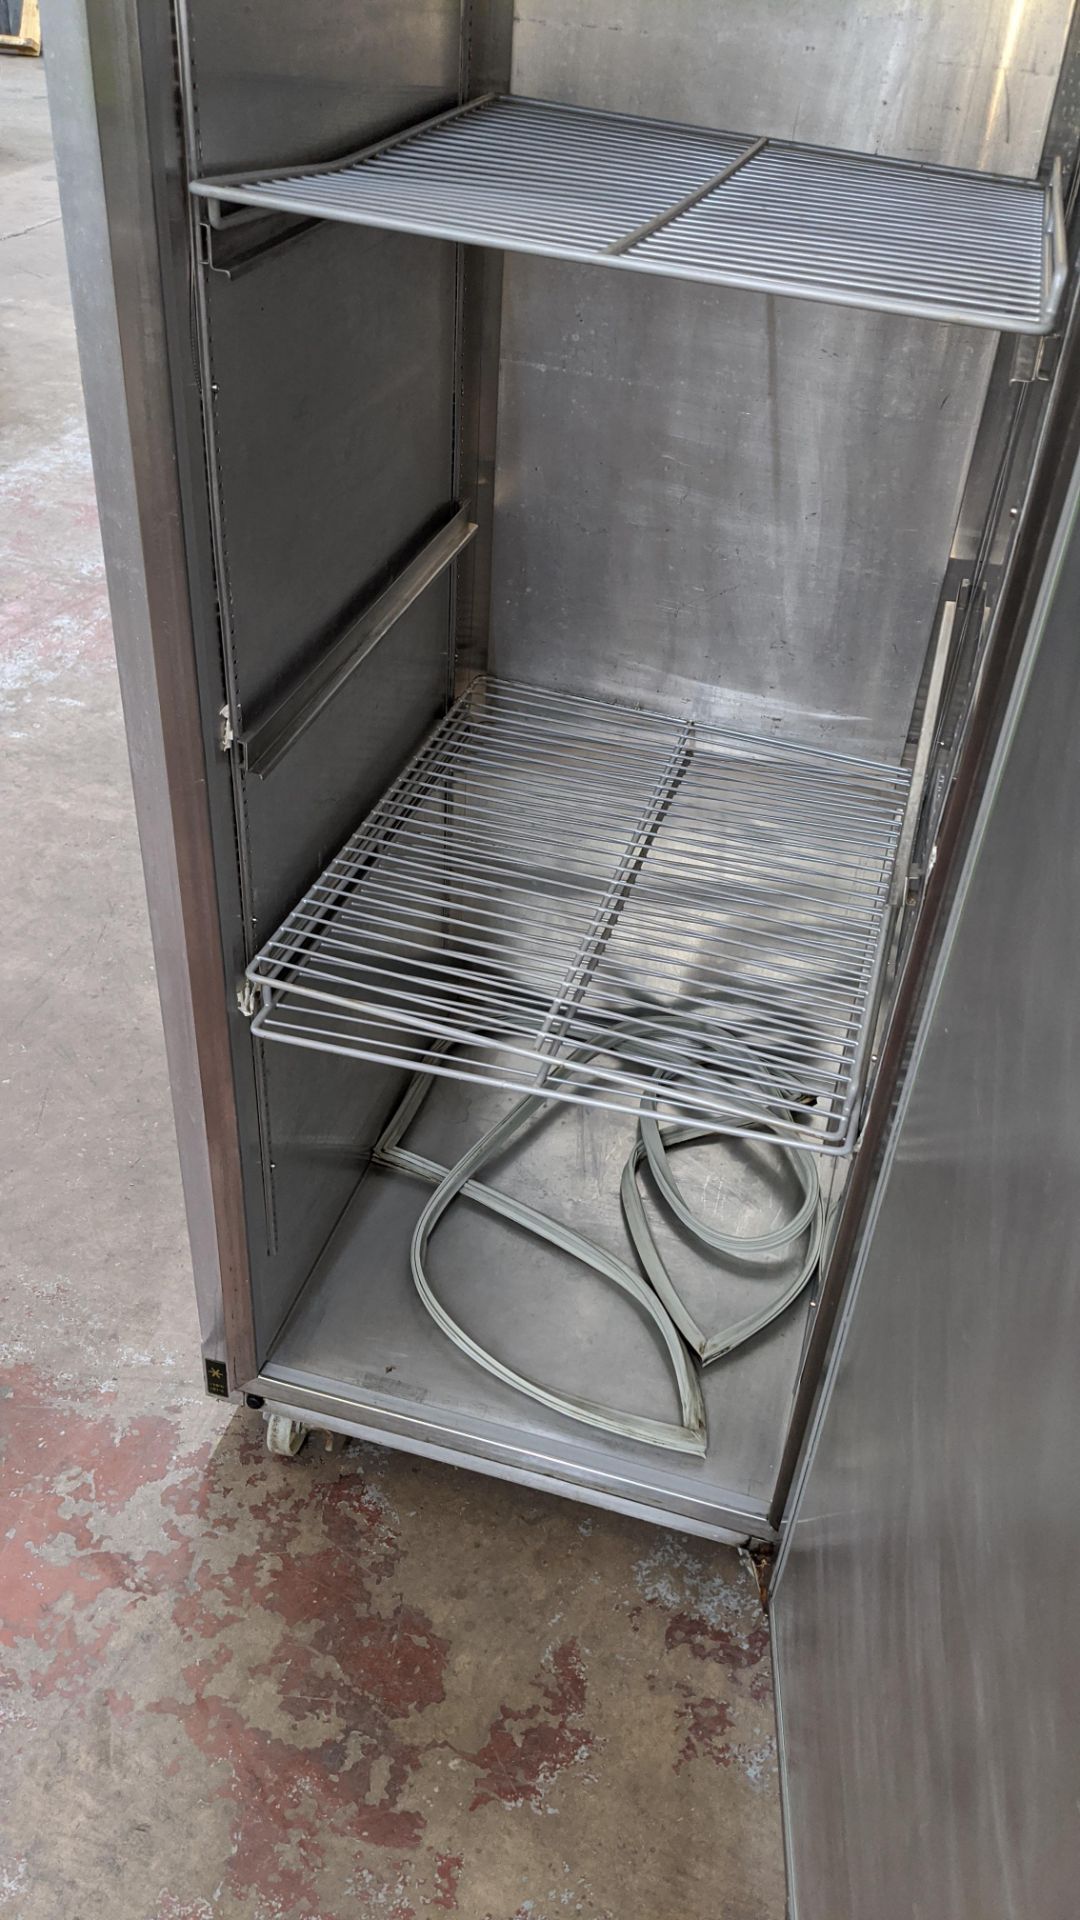 Sadia Sterling Gastronorm ST20F stainless steel tall commercial freezer - Image 4 of 6